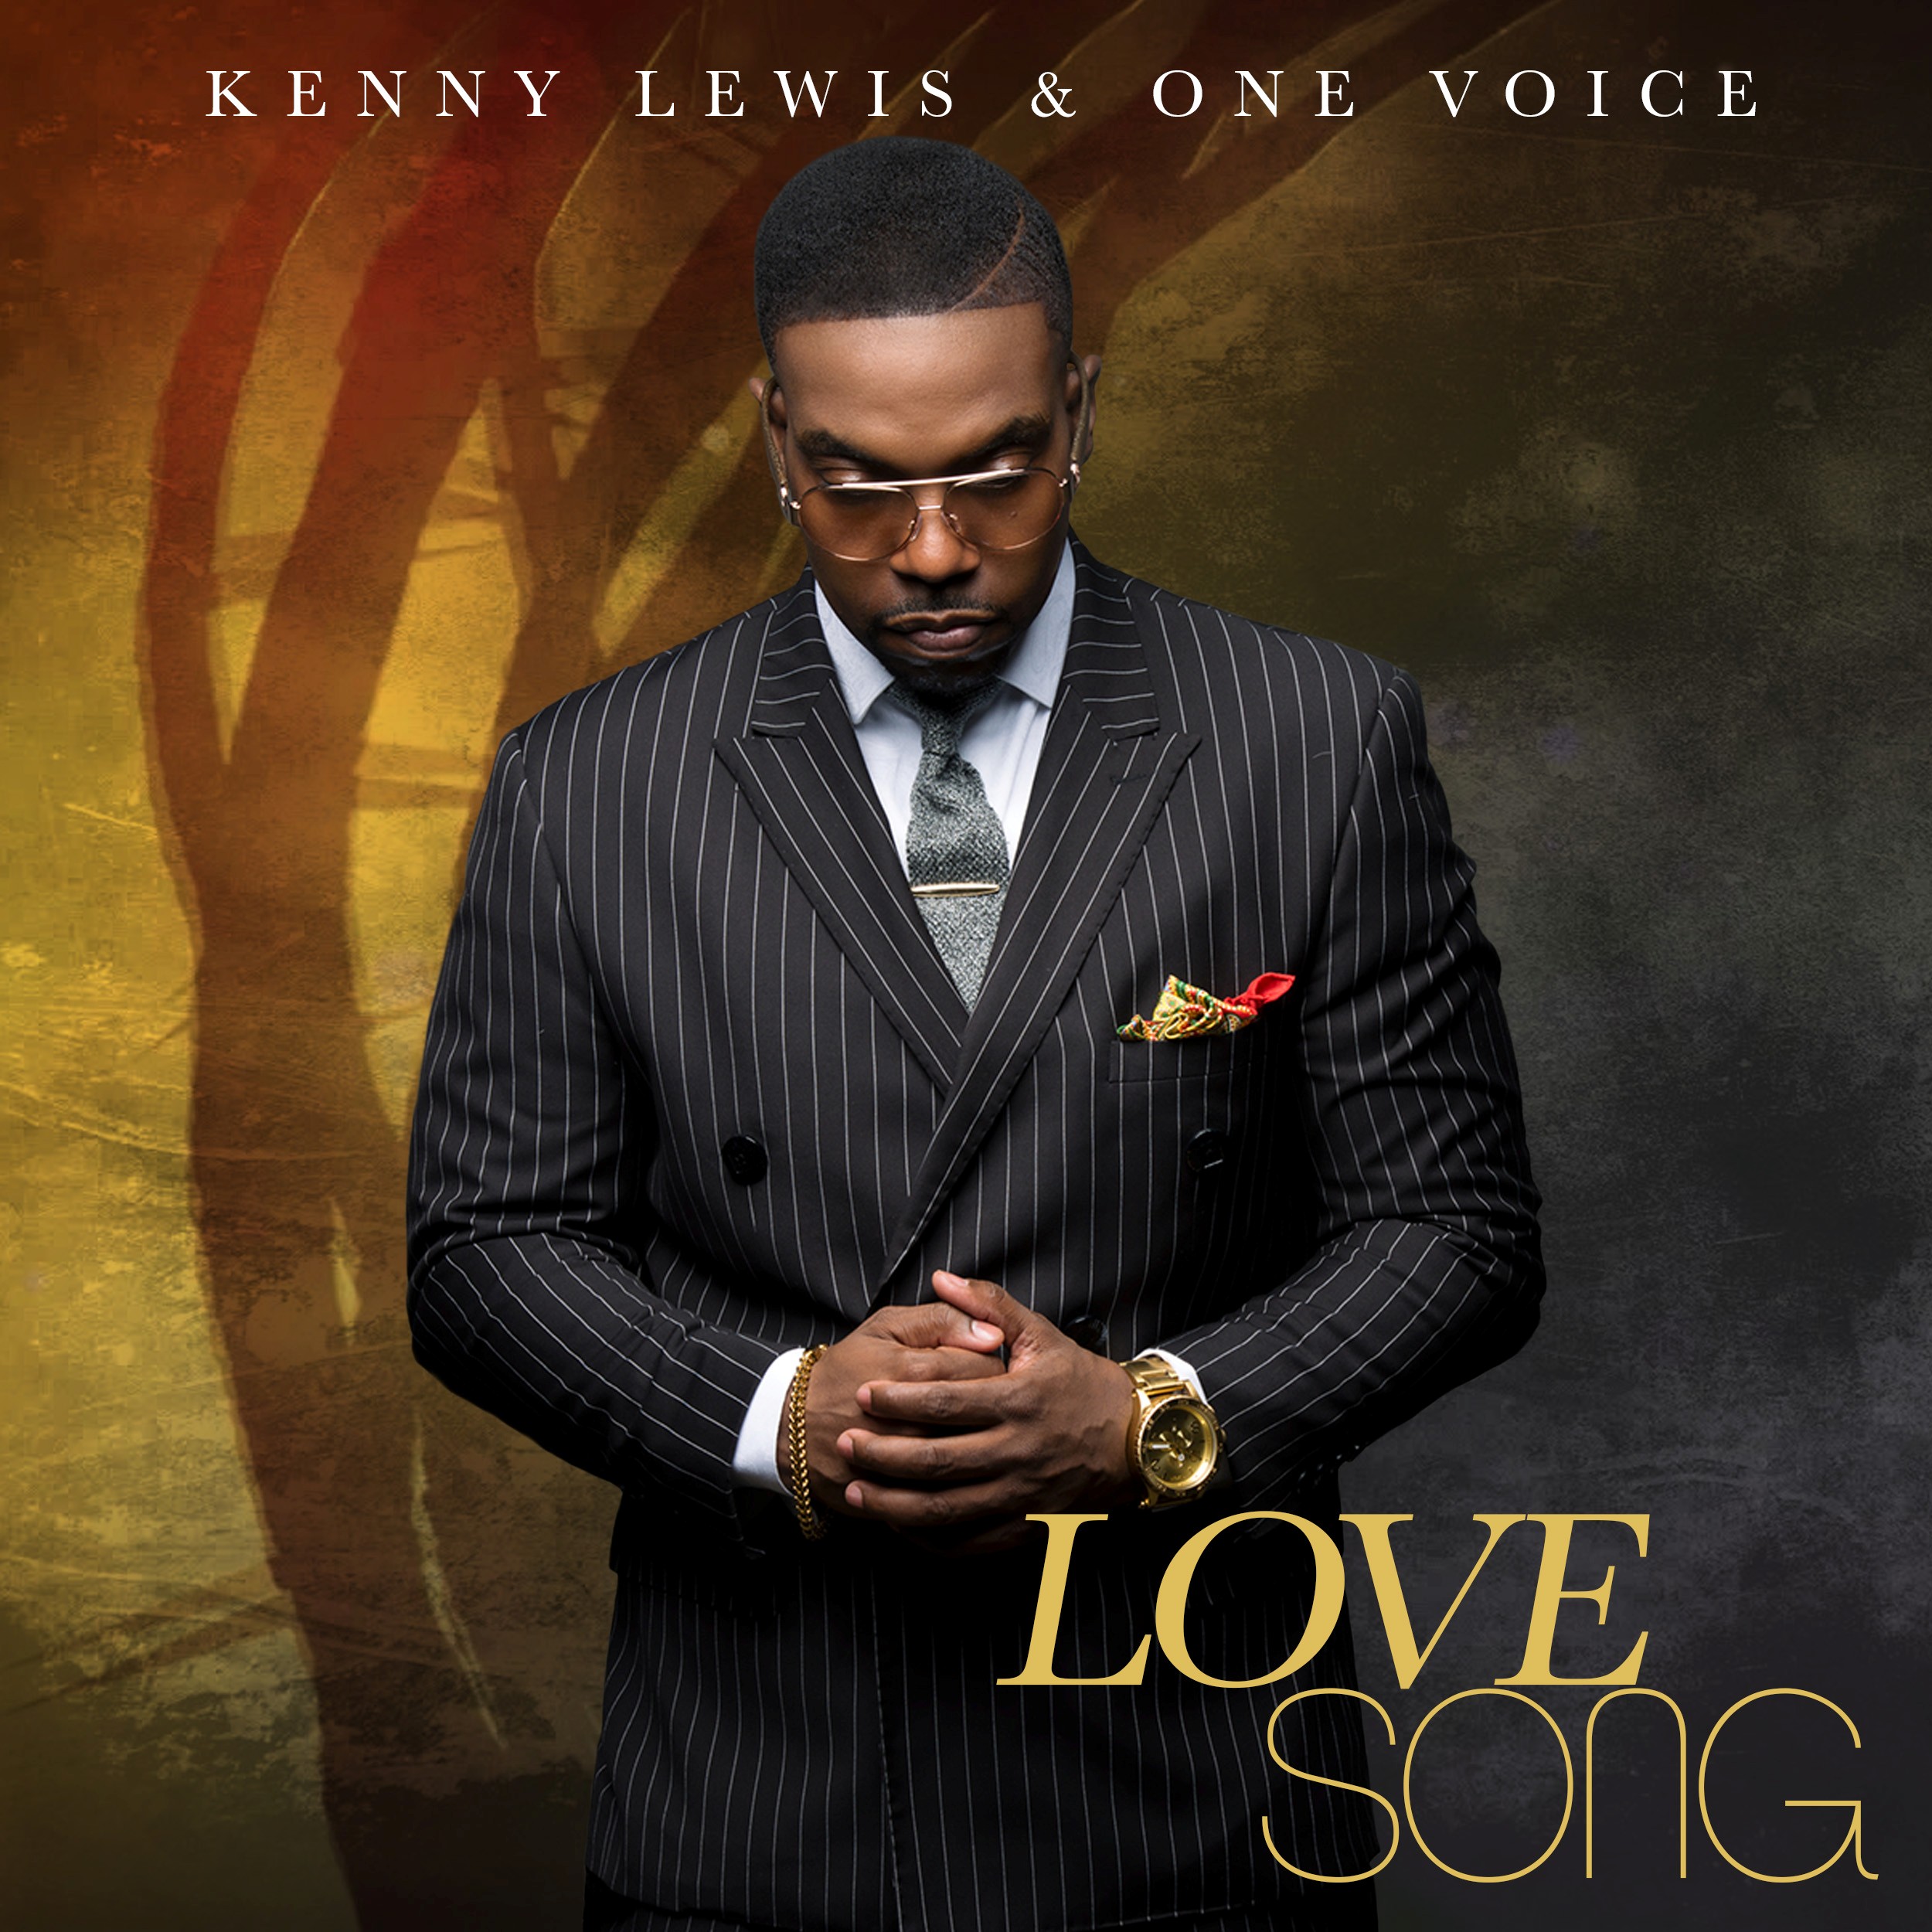 kenny-lewis-one-voice-love-song